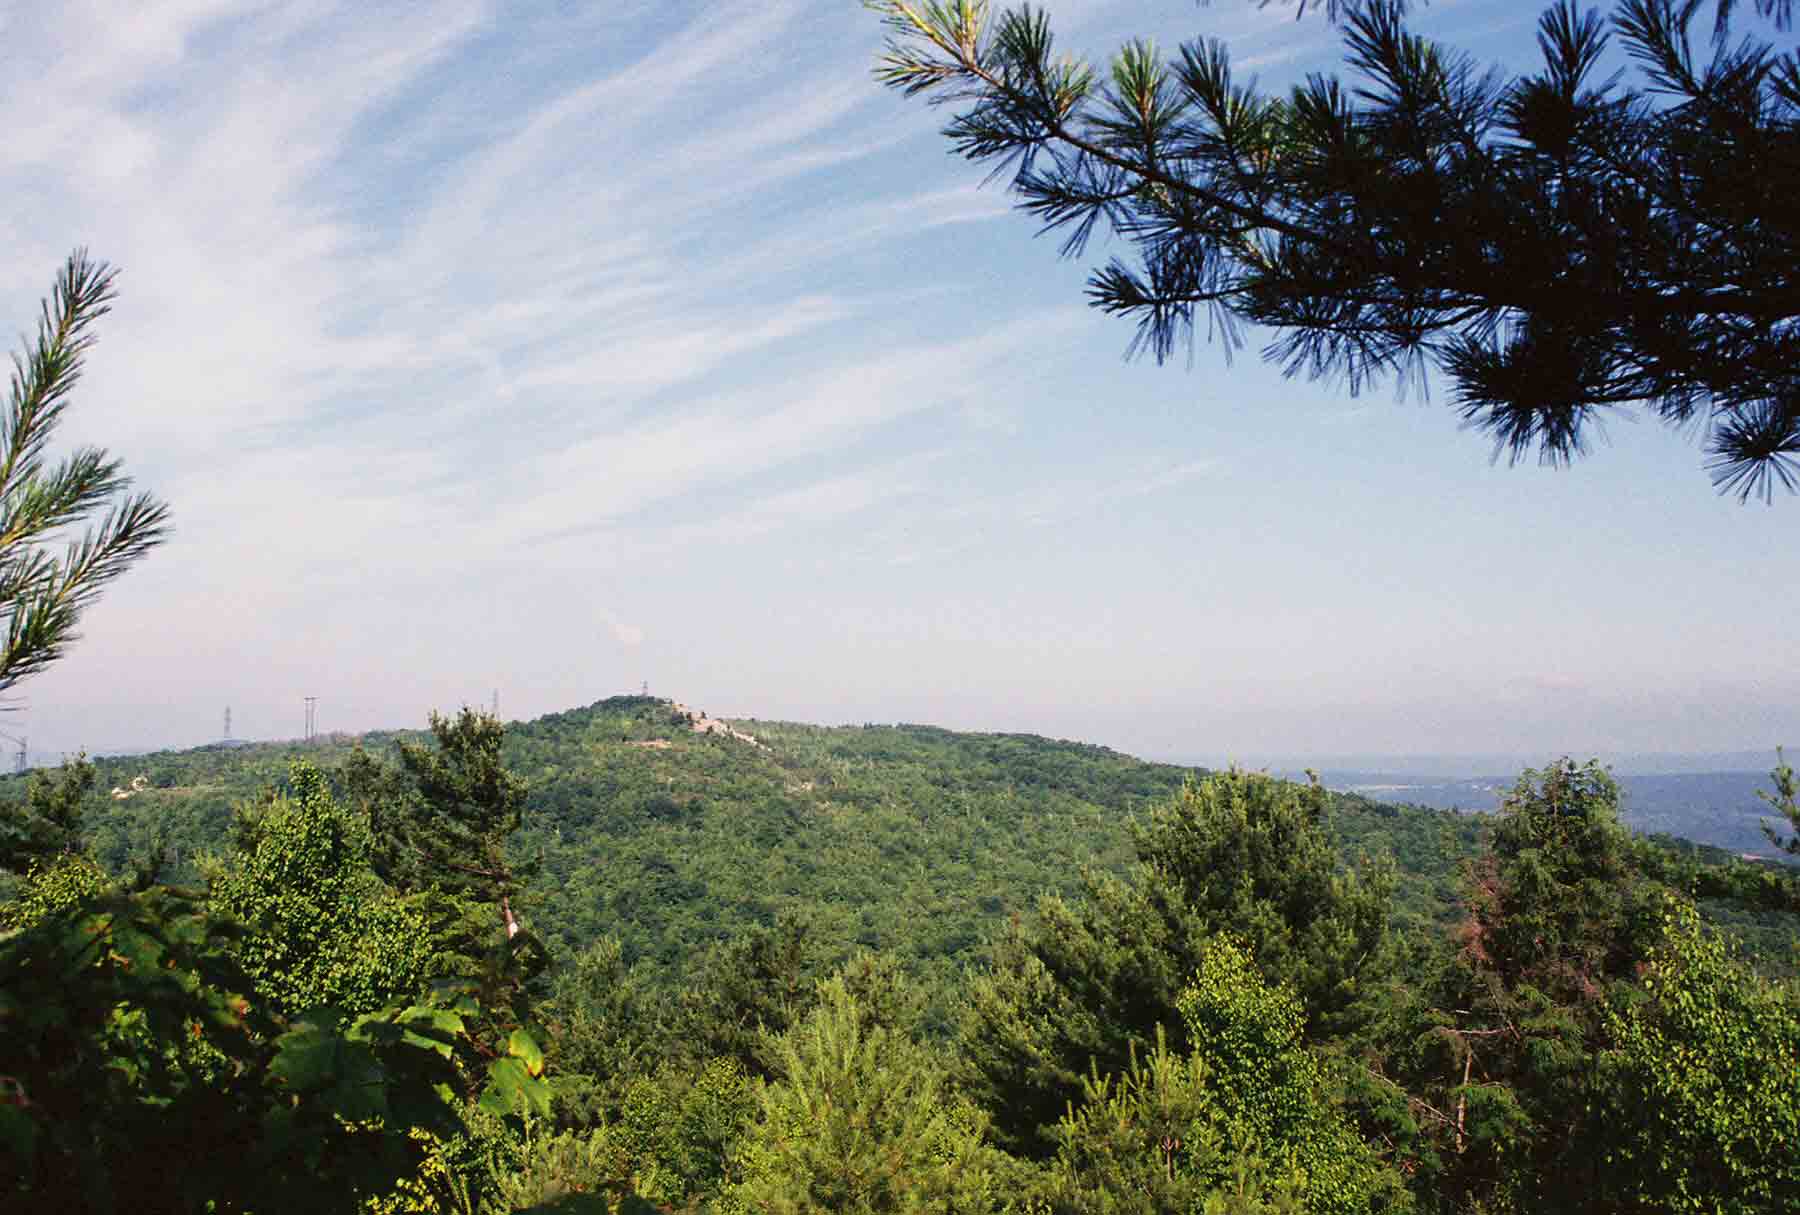 mm 15.1 - View west from near Weathering Knob which is near Little Gap.  Courtesy dlcul@conncoll.edu